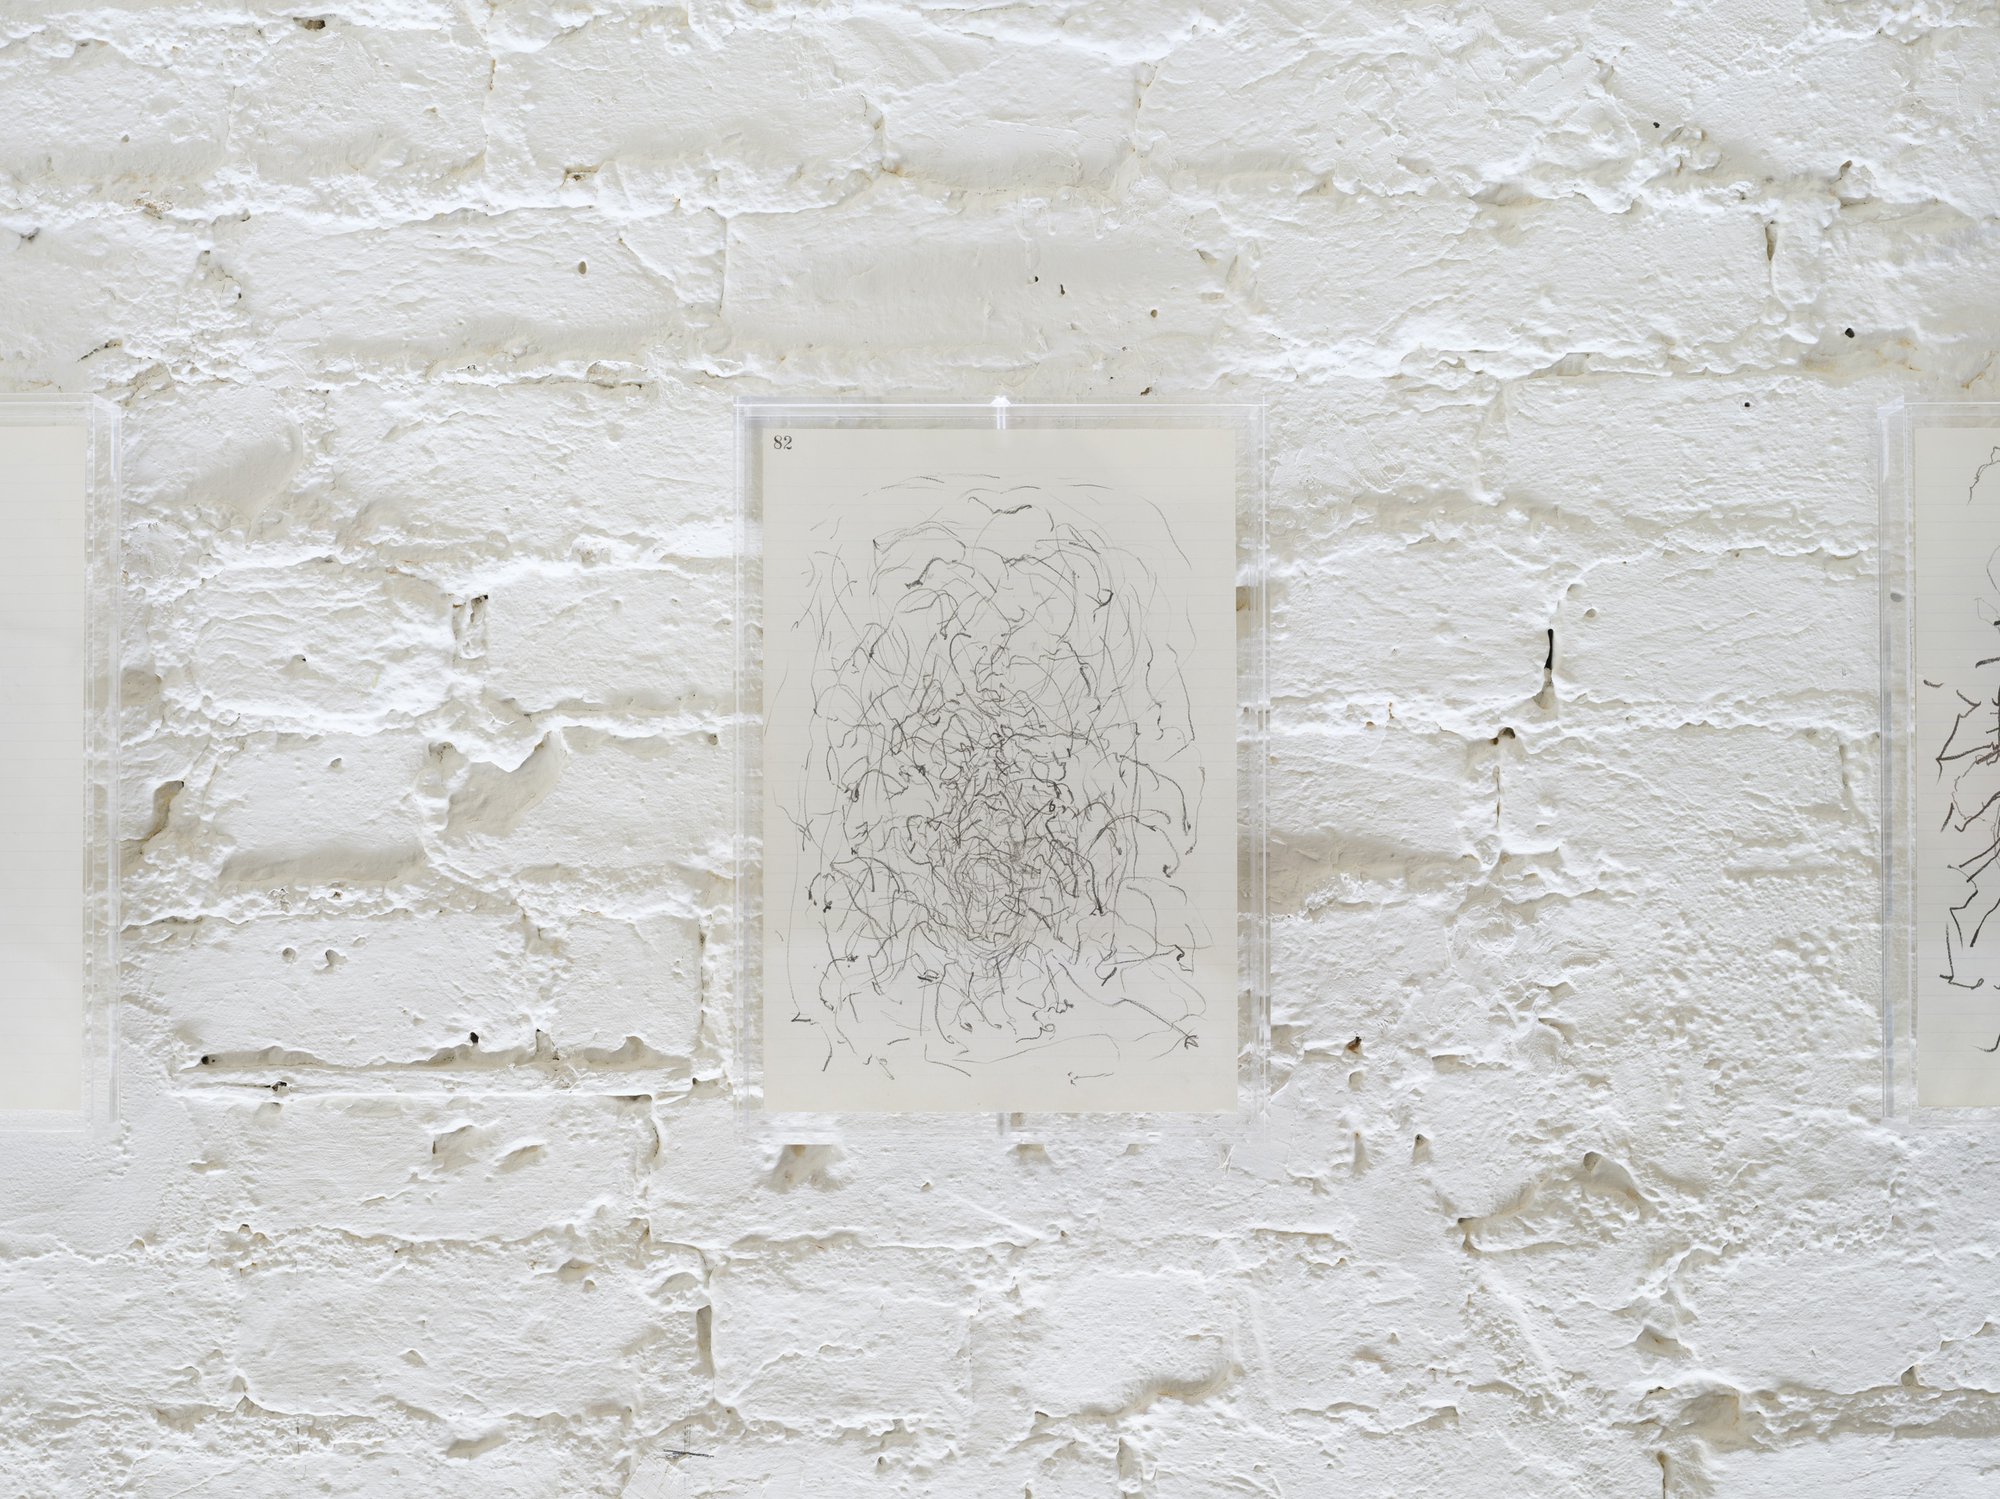 Haris Epaminonda, Untitled (82), graphite and pencil on paper, slide plate with plexi hood, 32.4 x 22.4 x 3.3 cm, 2023